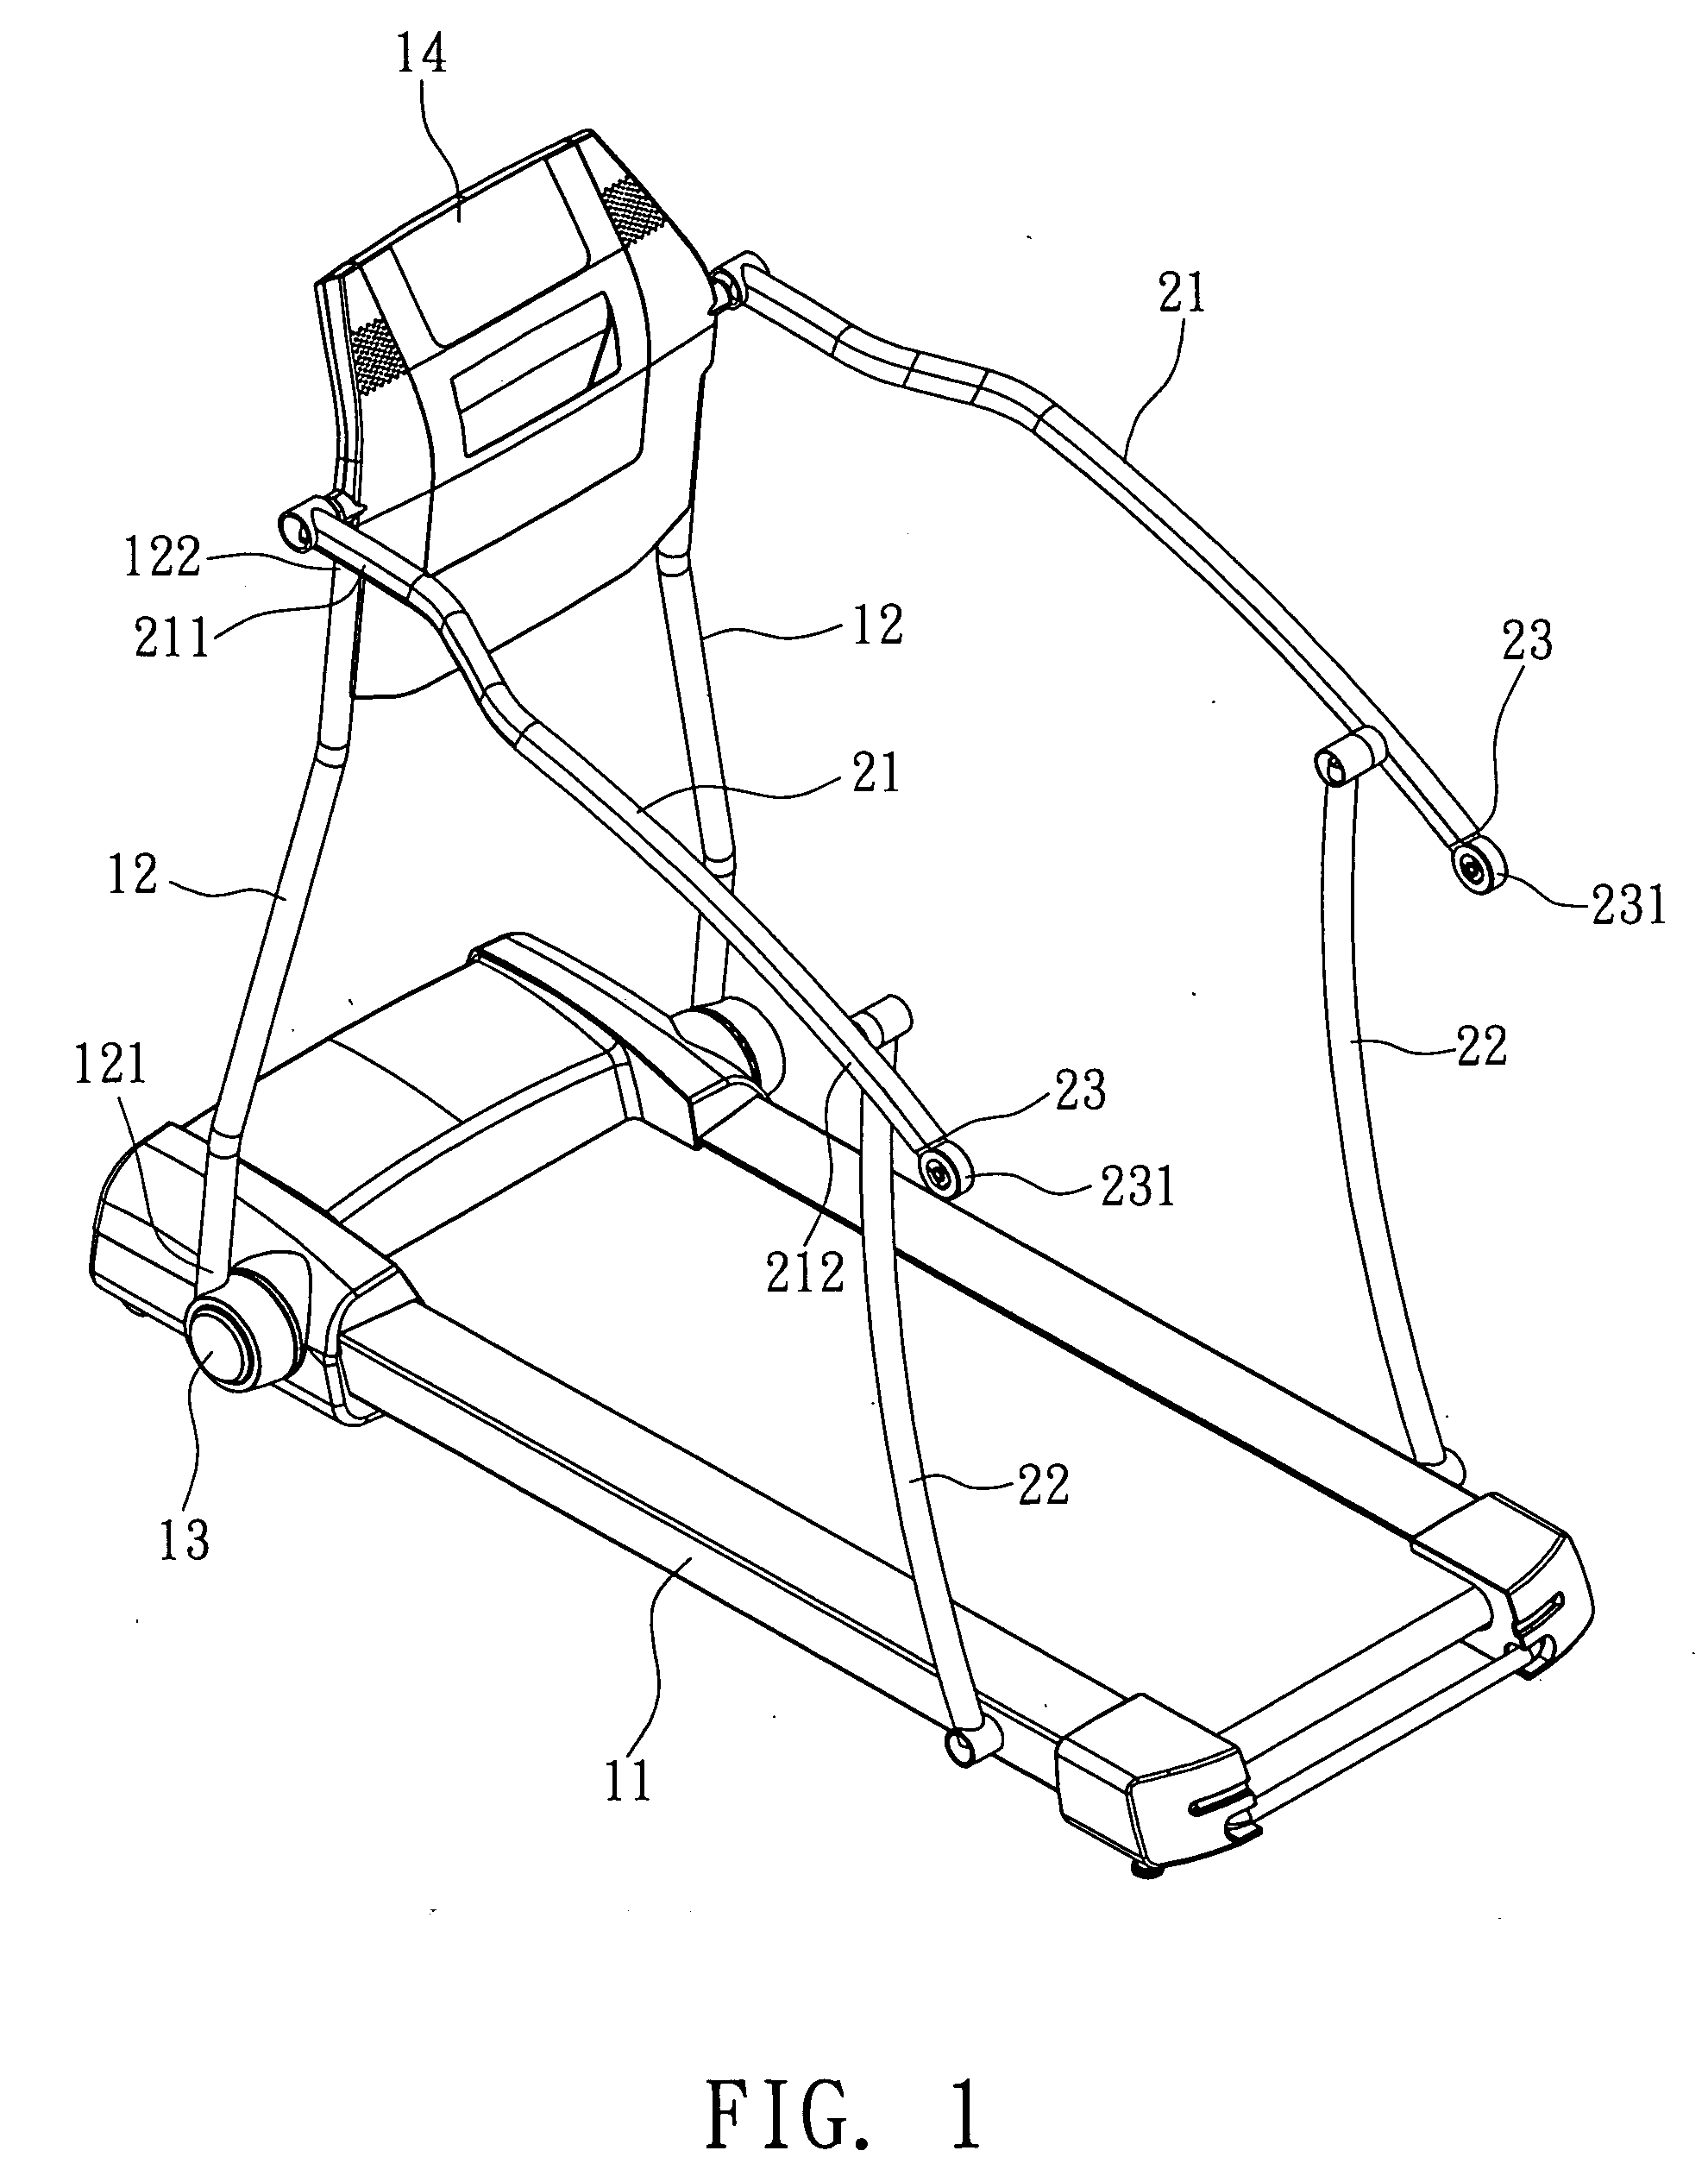 Folding structure of a treadmill